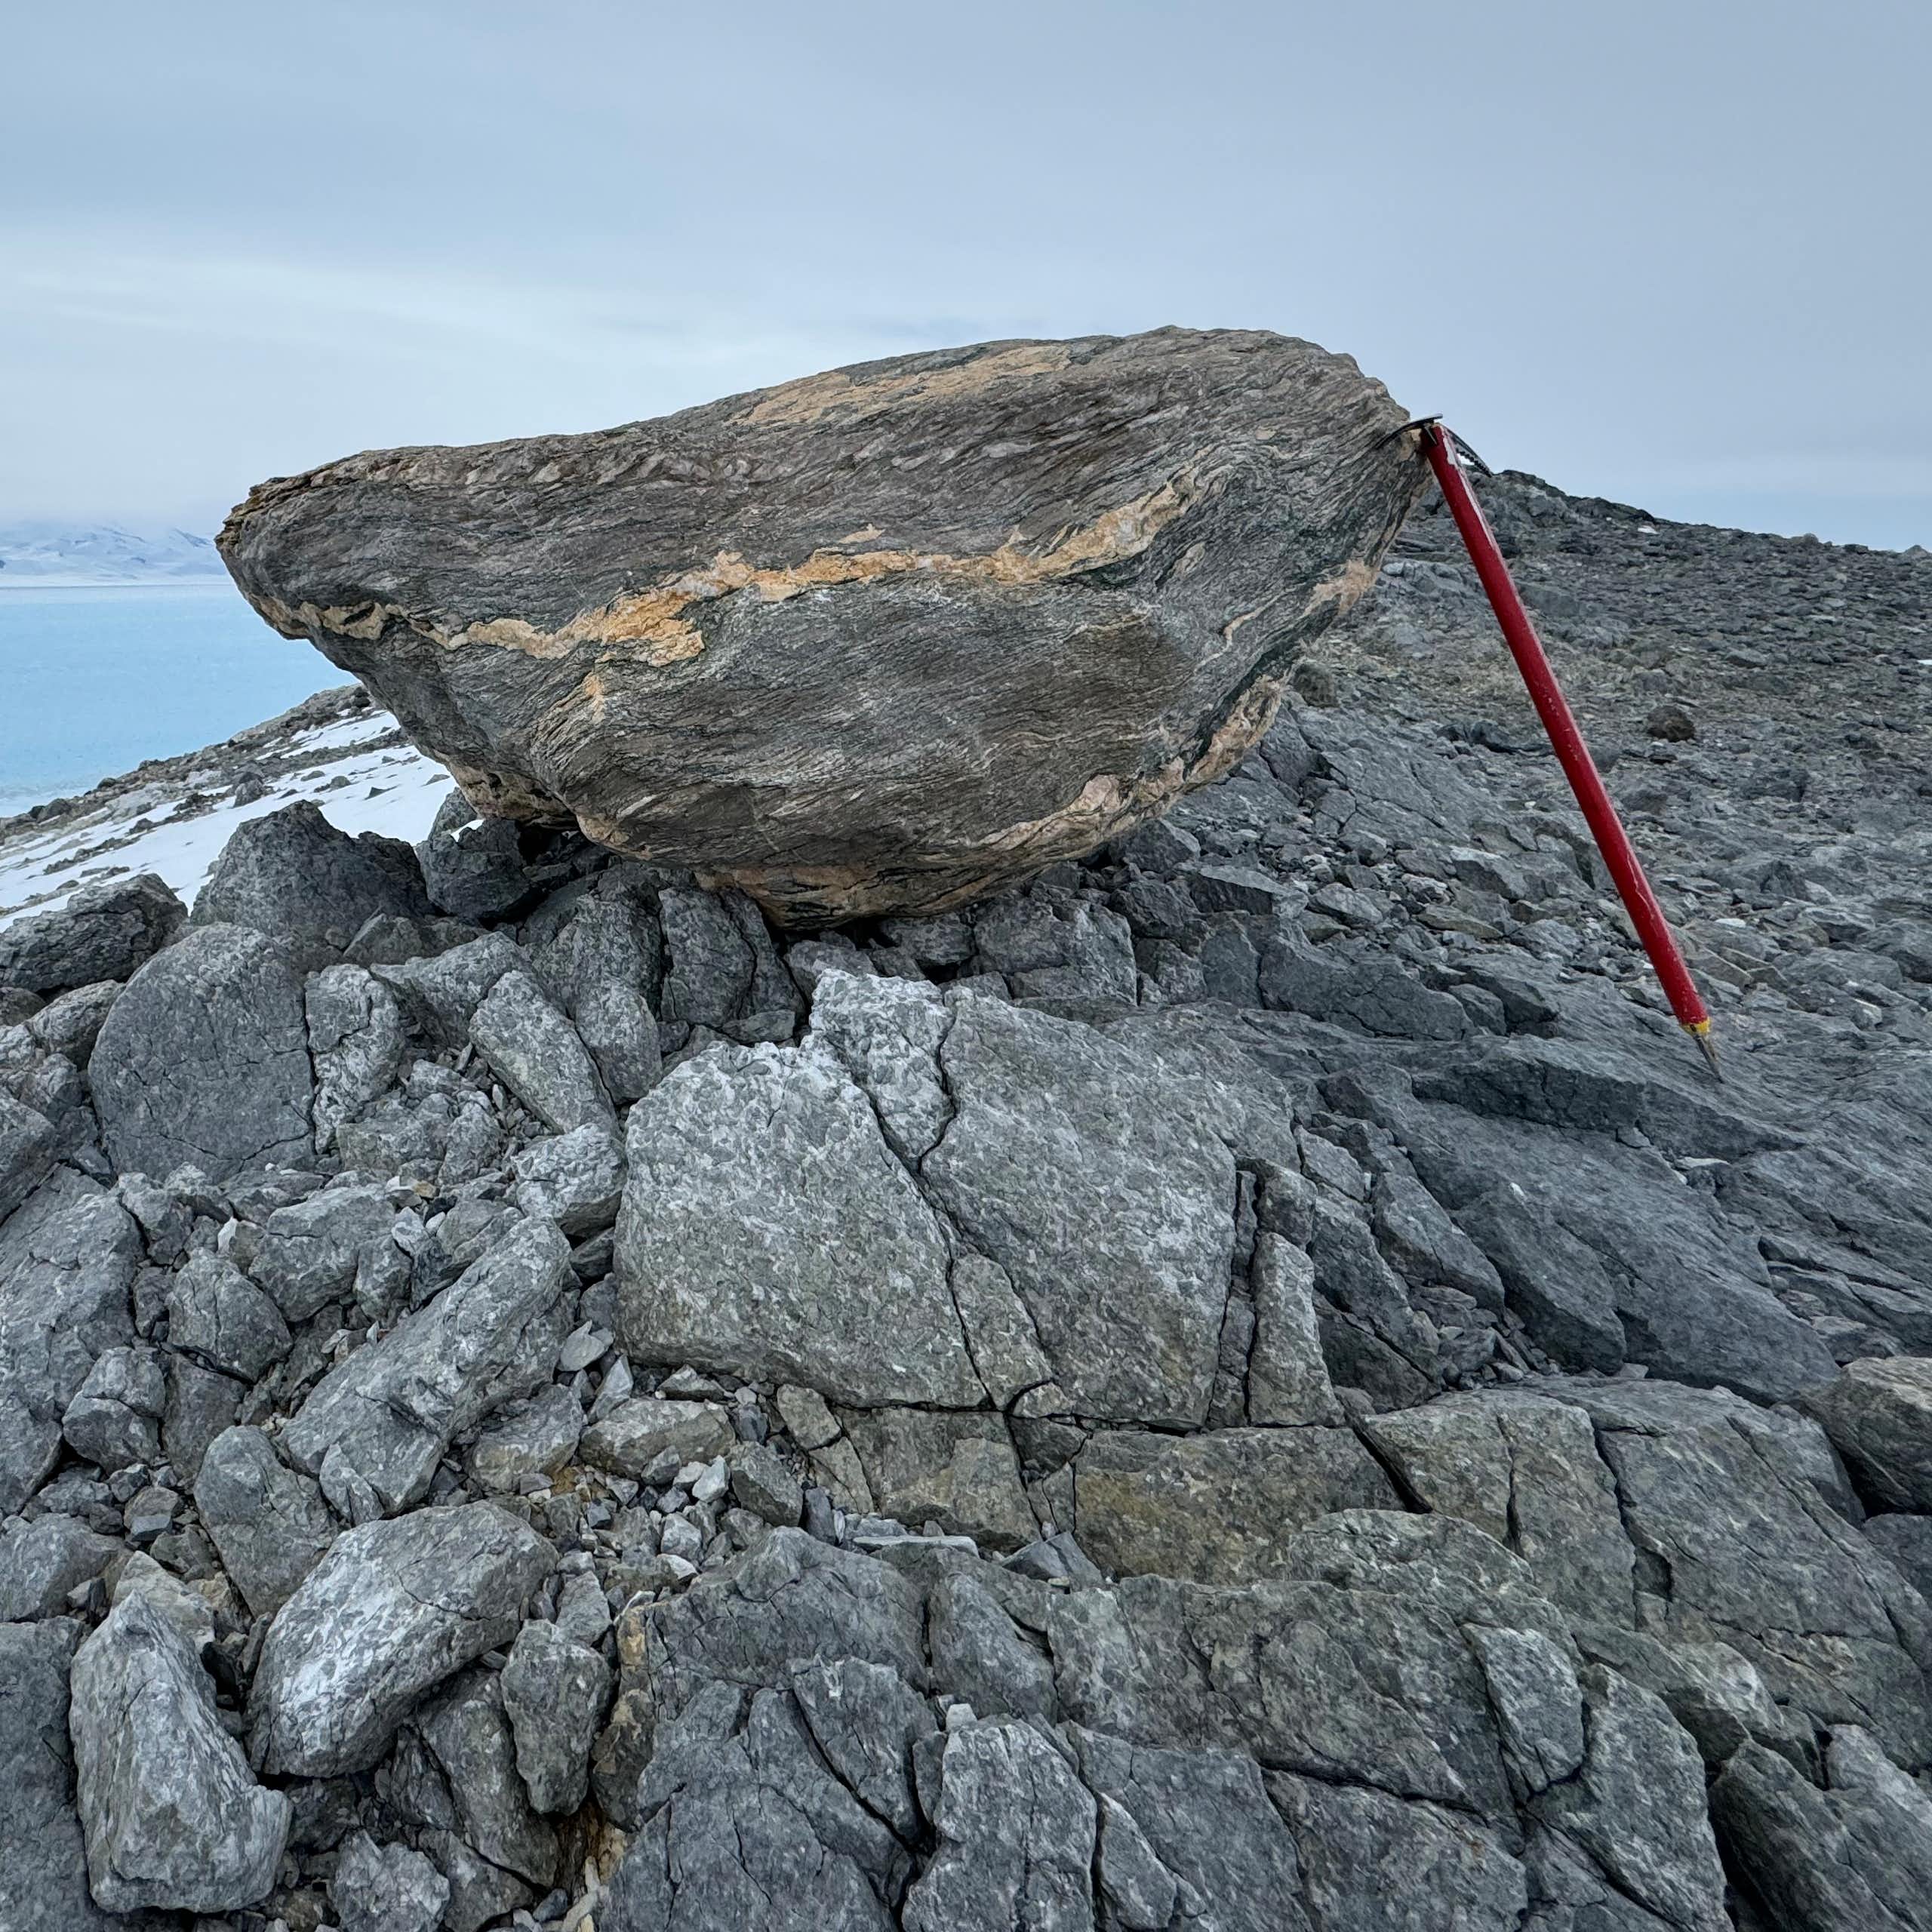 A rock perched on an outcrop in Antarctica, with am ice pick for size comparison.